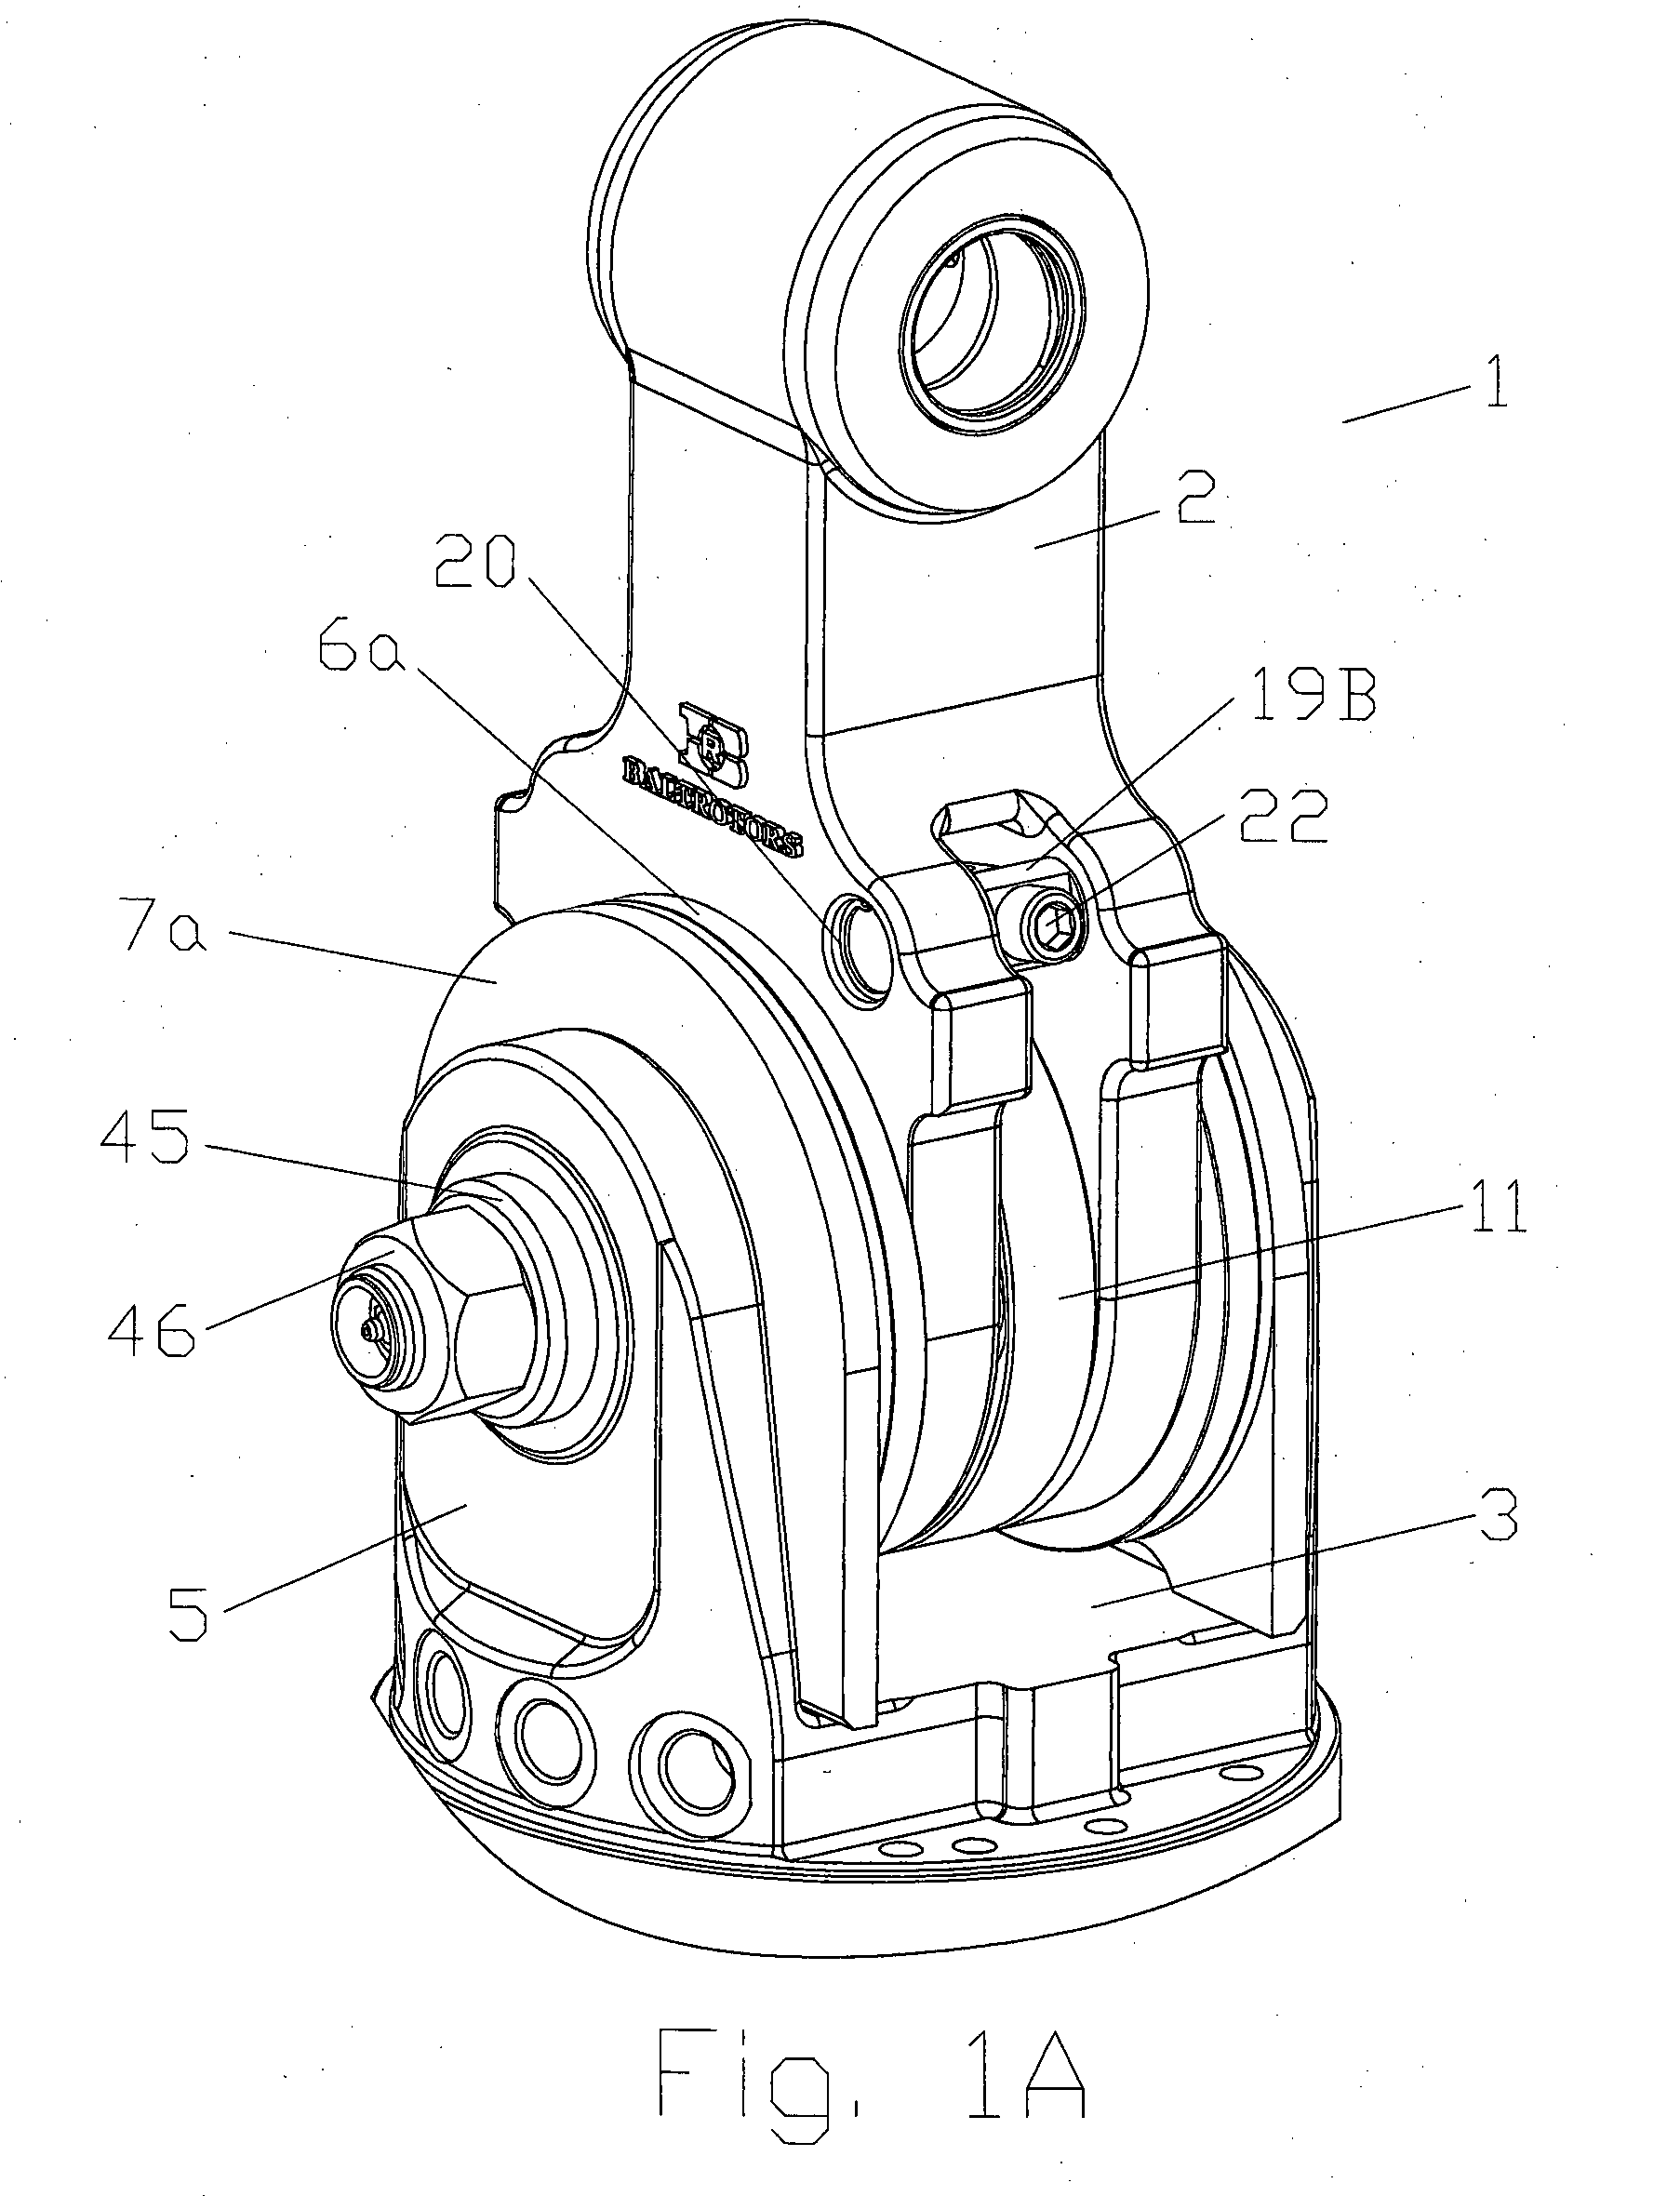 Swing damper with disc brakes and its control mechanism